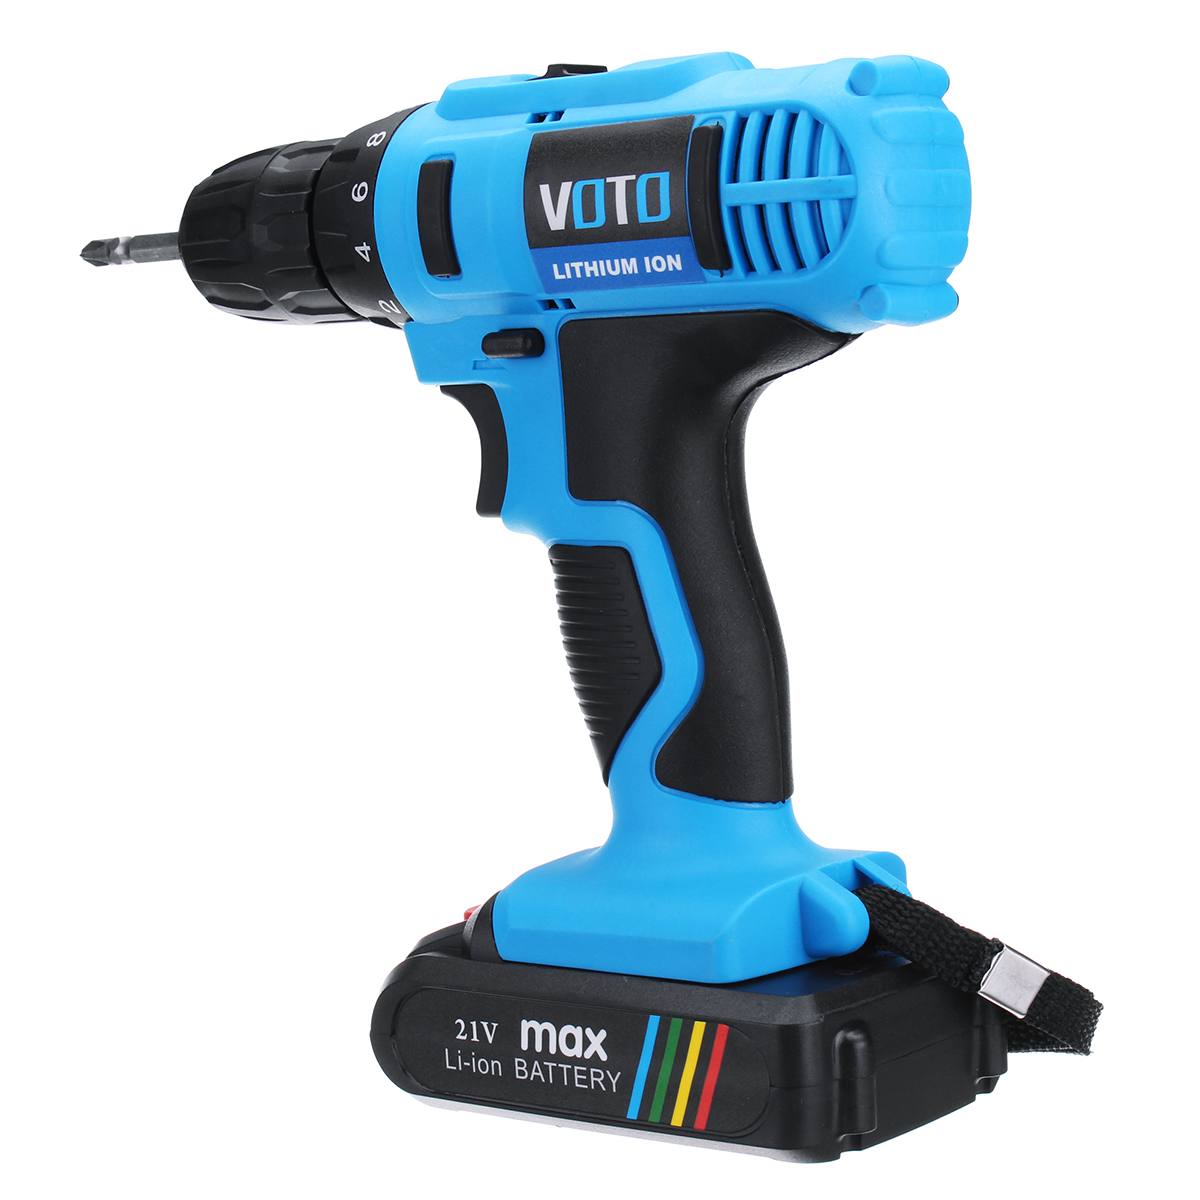 AC-110-220V-DC-21V-Lithium-Cordless-Rechargeable-Power-Drill-Electric-Screwdriver-Two-Speed-1305352-4